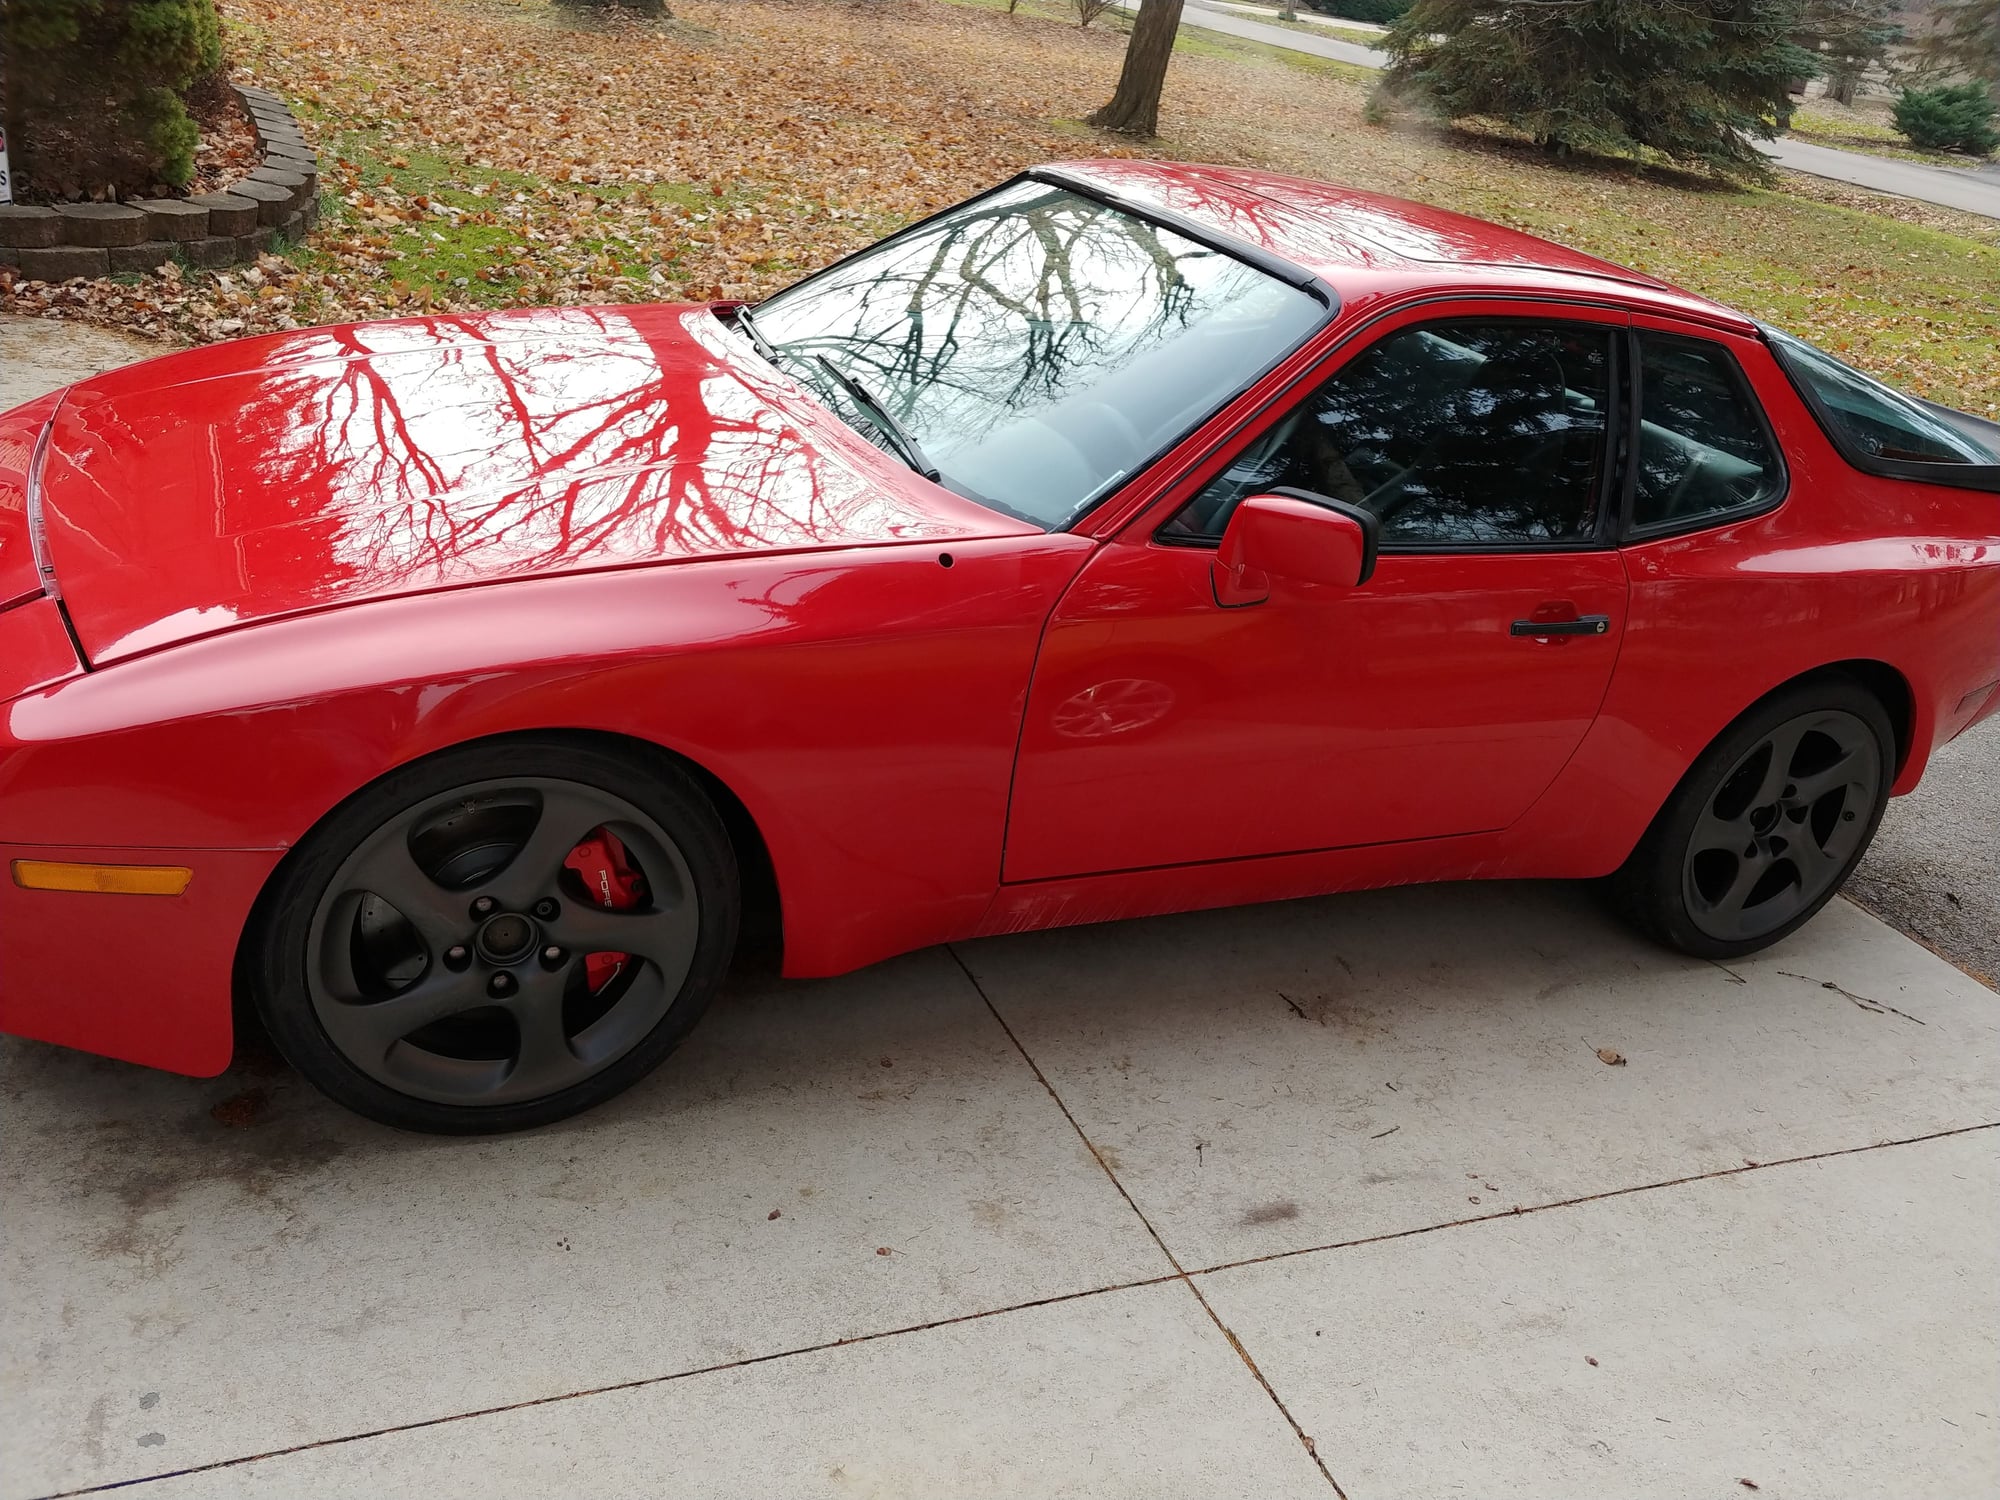 1984 Porsche 944 - Guards Red Porsche 944 - LS3, 01E 6 speed, 18Z Big Brakes, AC, Power Steering - Used - VIN WP0AA0946EN461317 - 100,000 Miles - 8 cyl - 2WD - Manual - Coupe - Red - Farmington Hills, MI 48334, United States